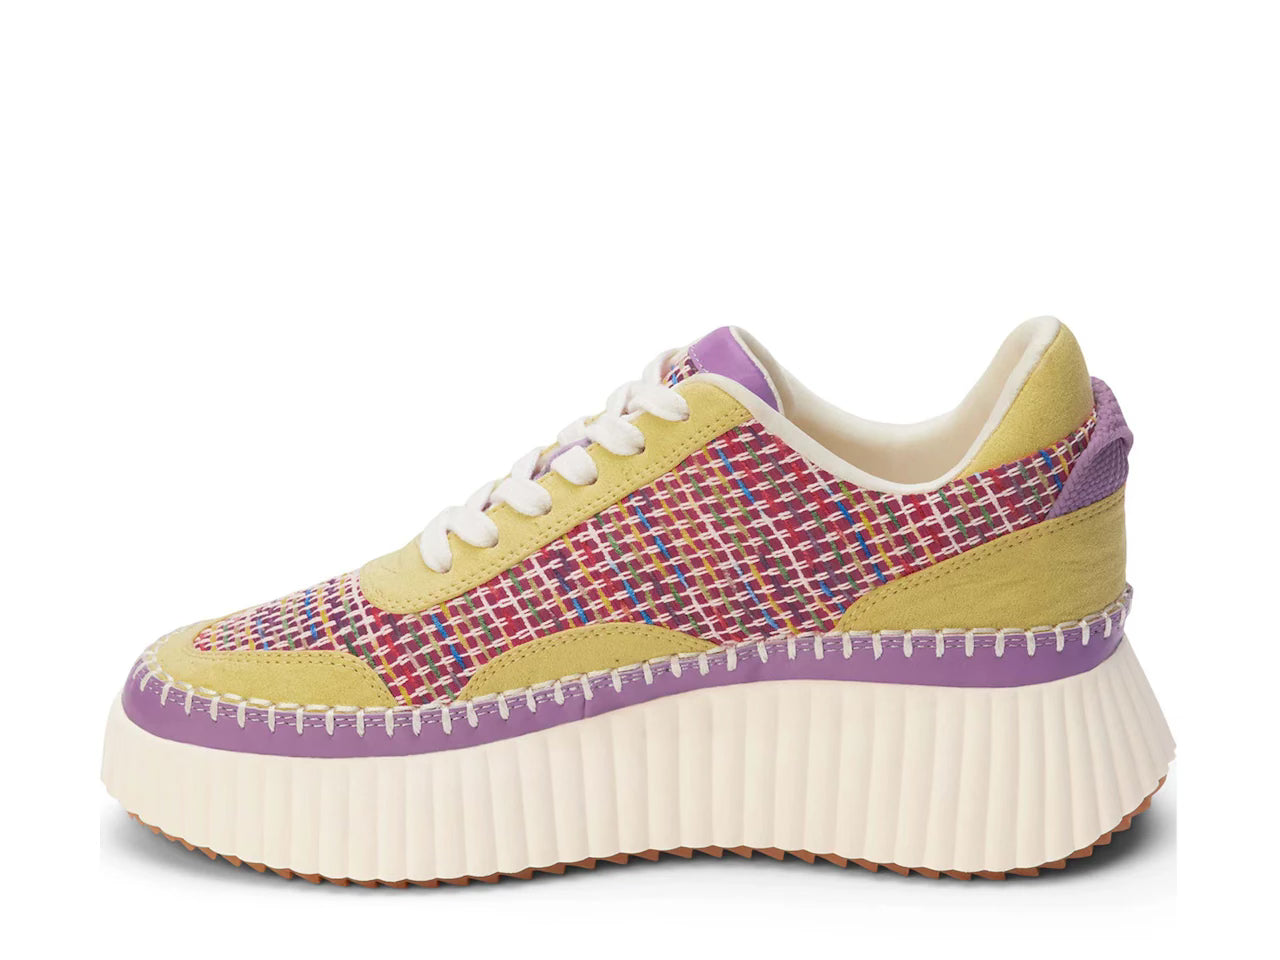 Coconuts Matisse Yellow-Multi Go To Platform Sneakers